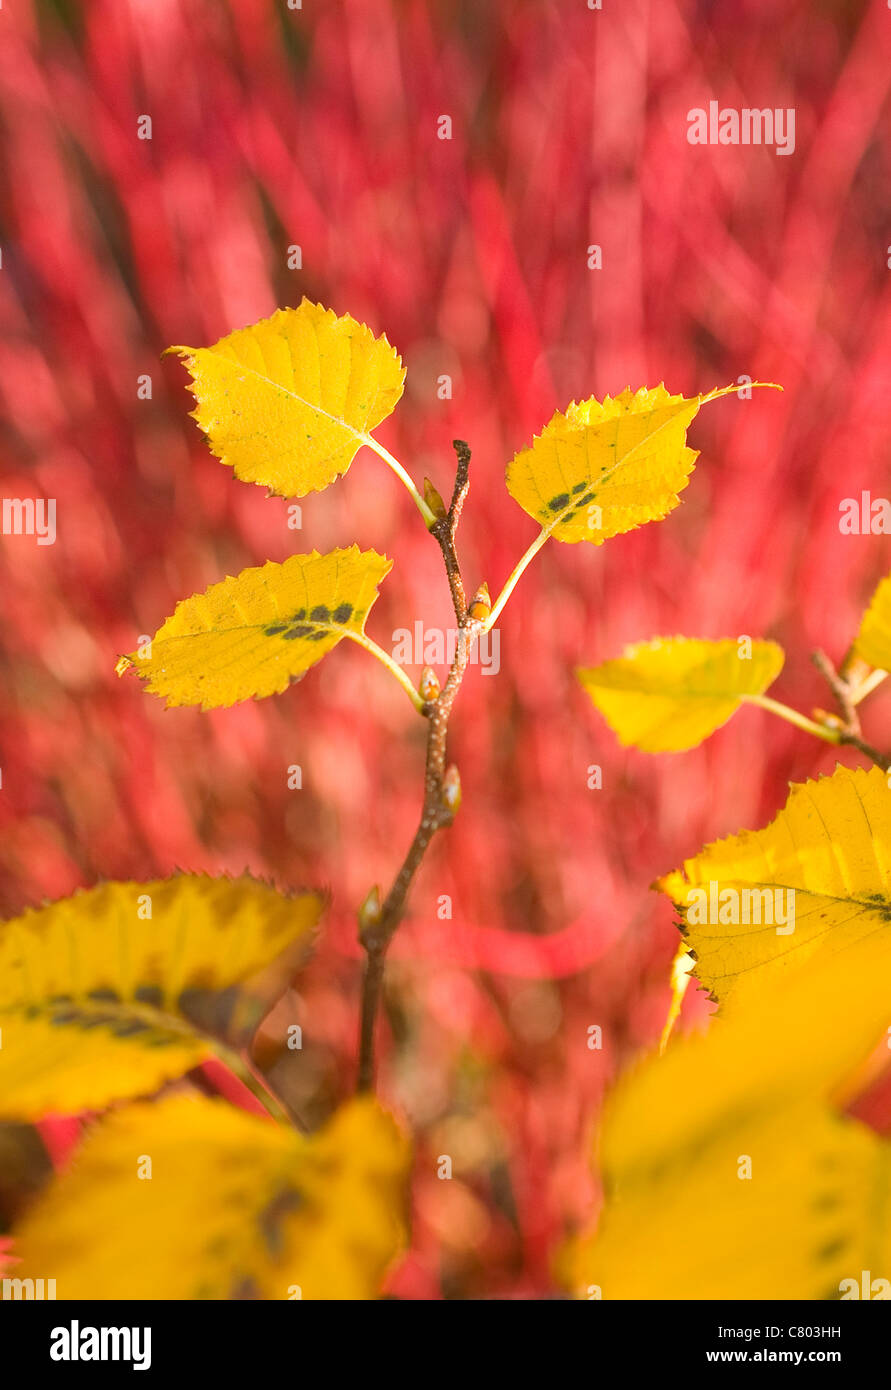 Yellow Birch Leaves contrasting with Red Cornus Stems in Autumn Stock Photo